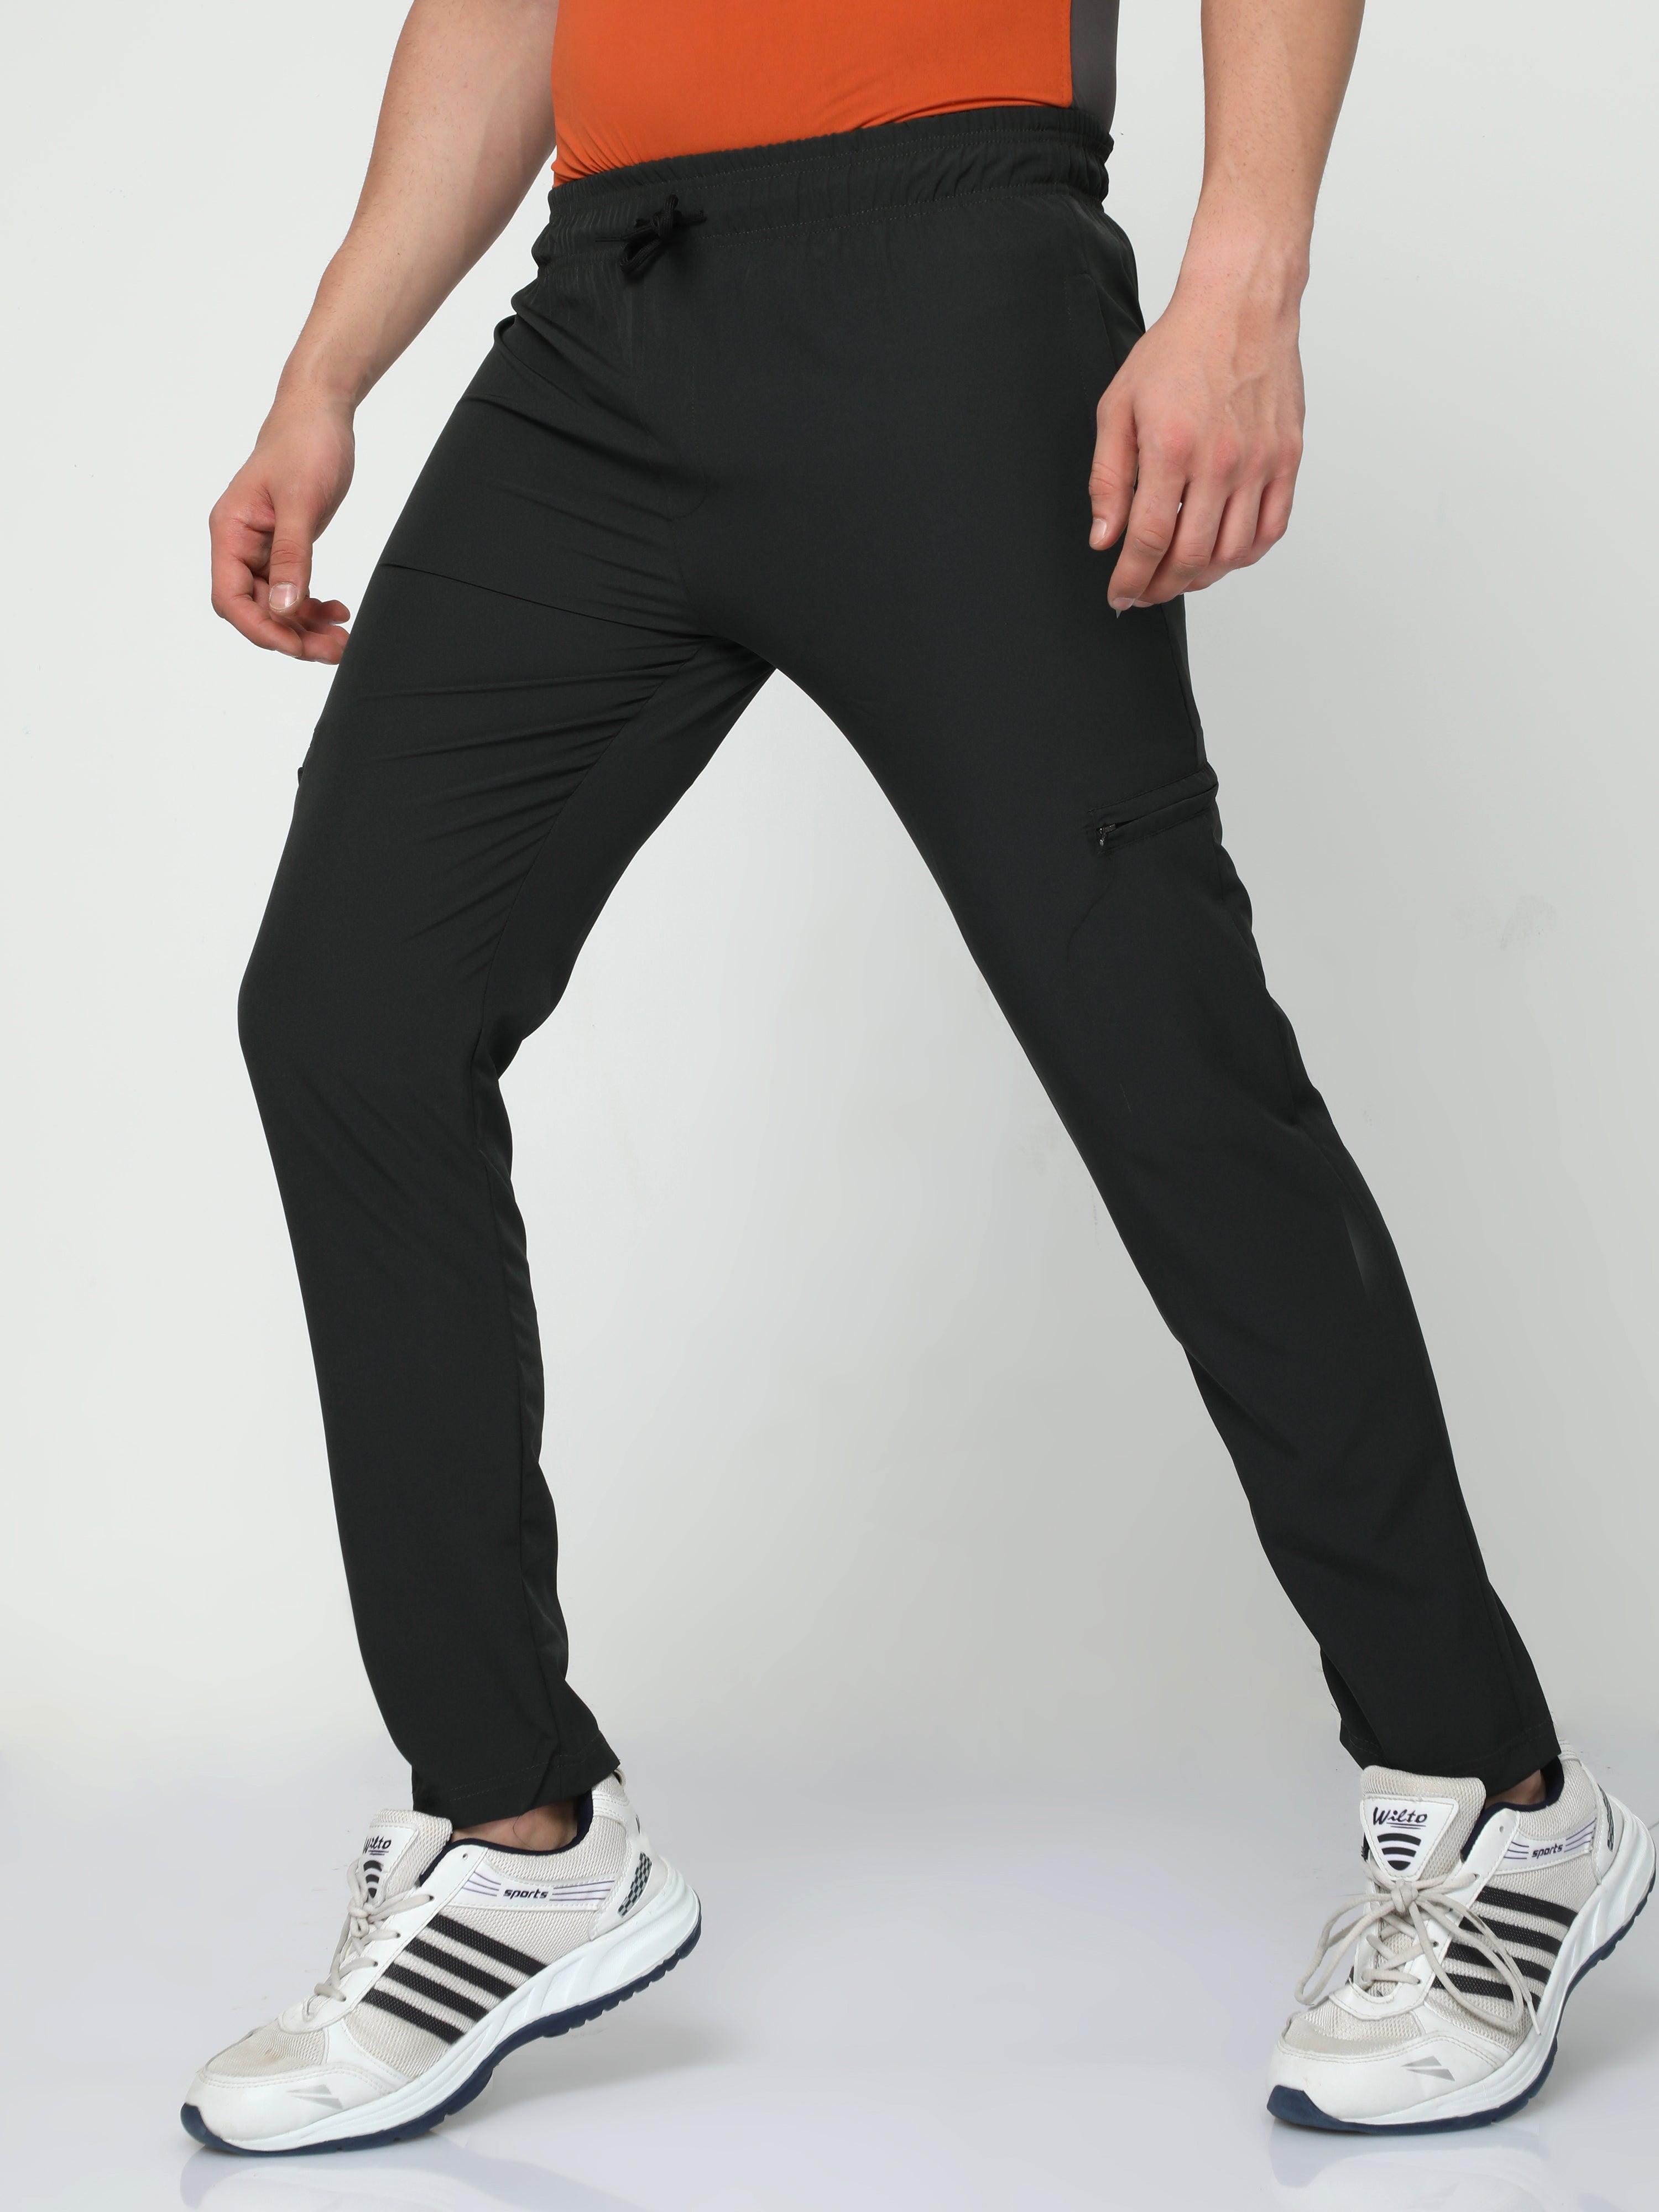 The Best Jogger Pants For Travel That Volleyball Players Go Crazy For!